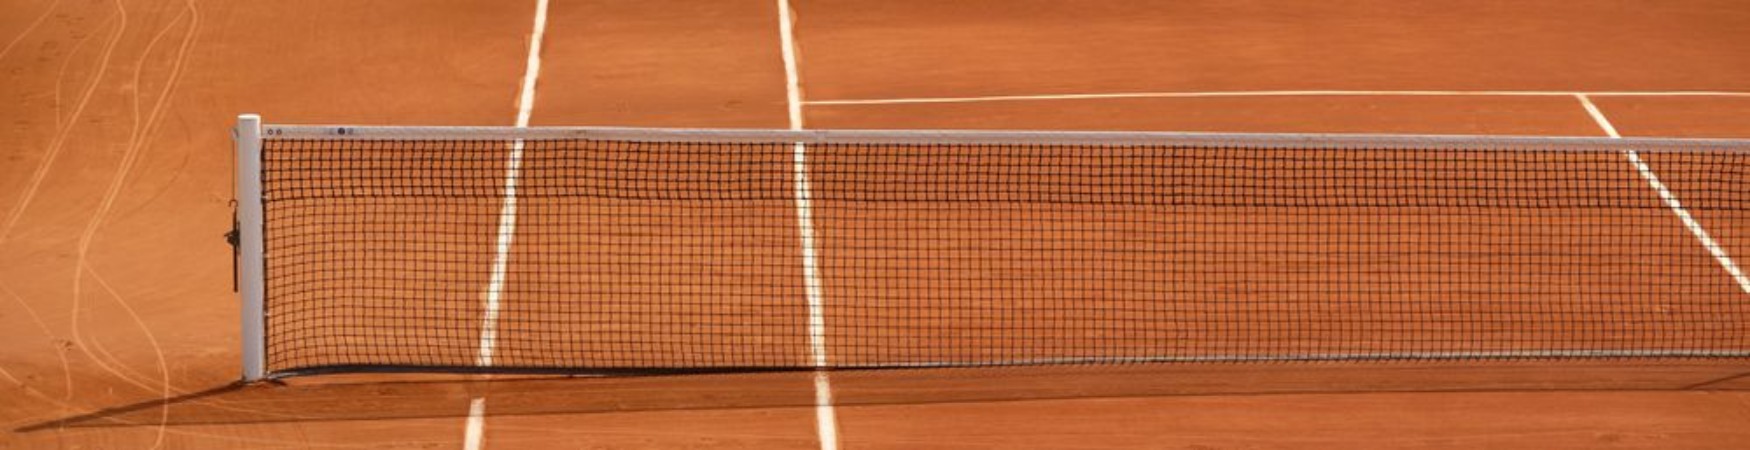 Picture of Tennis Net